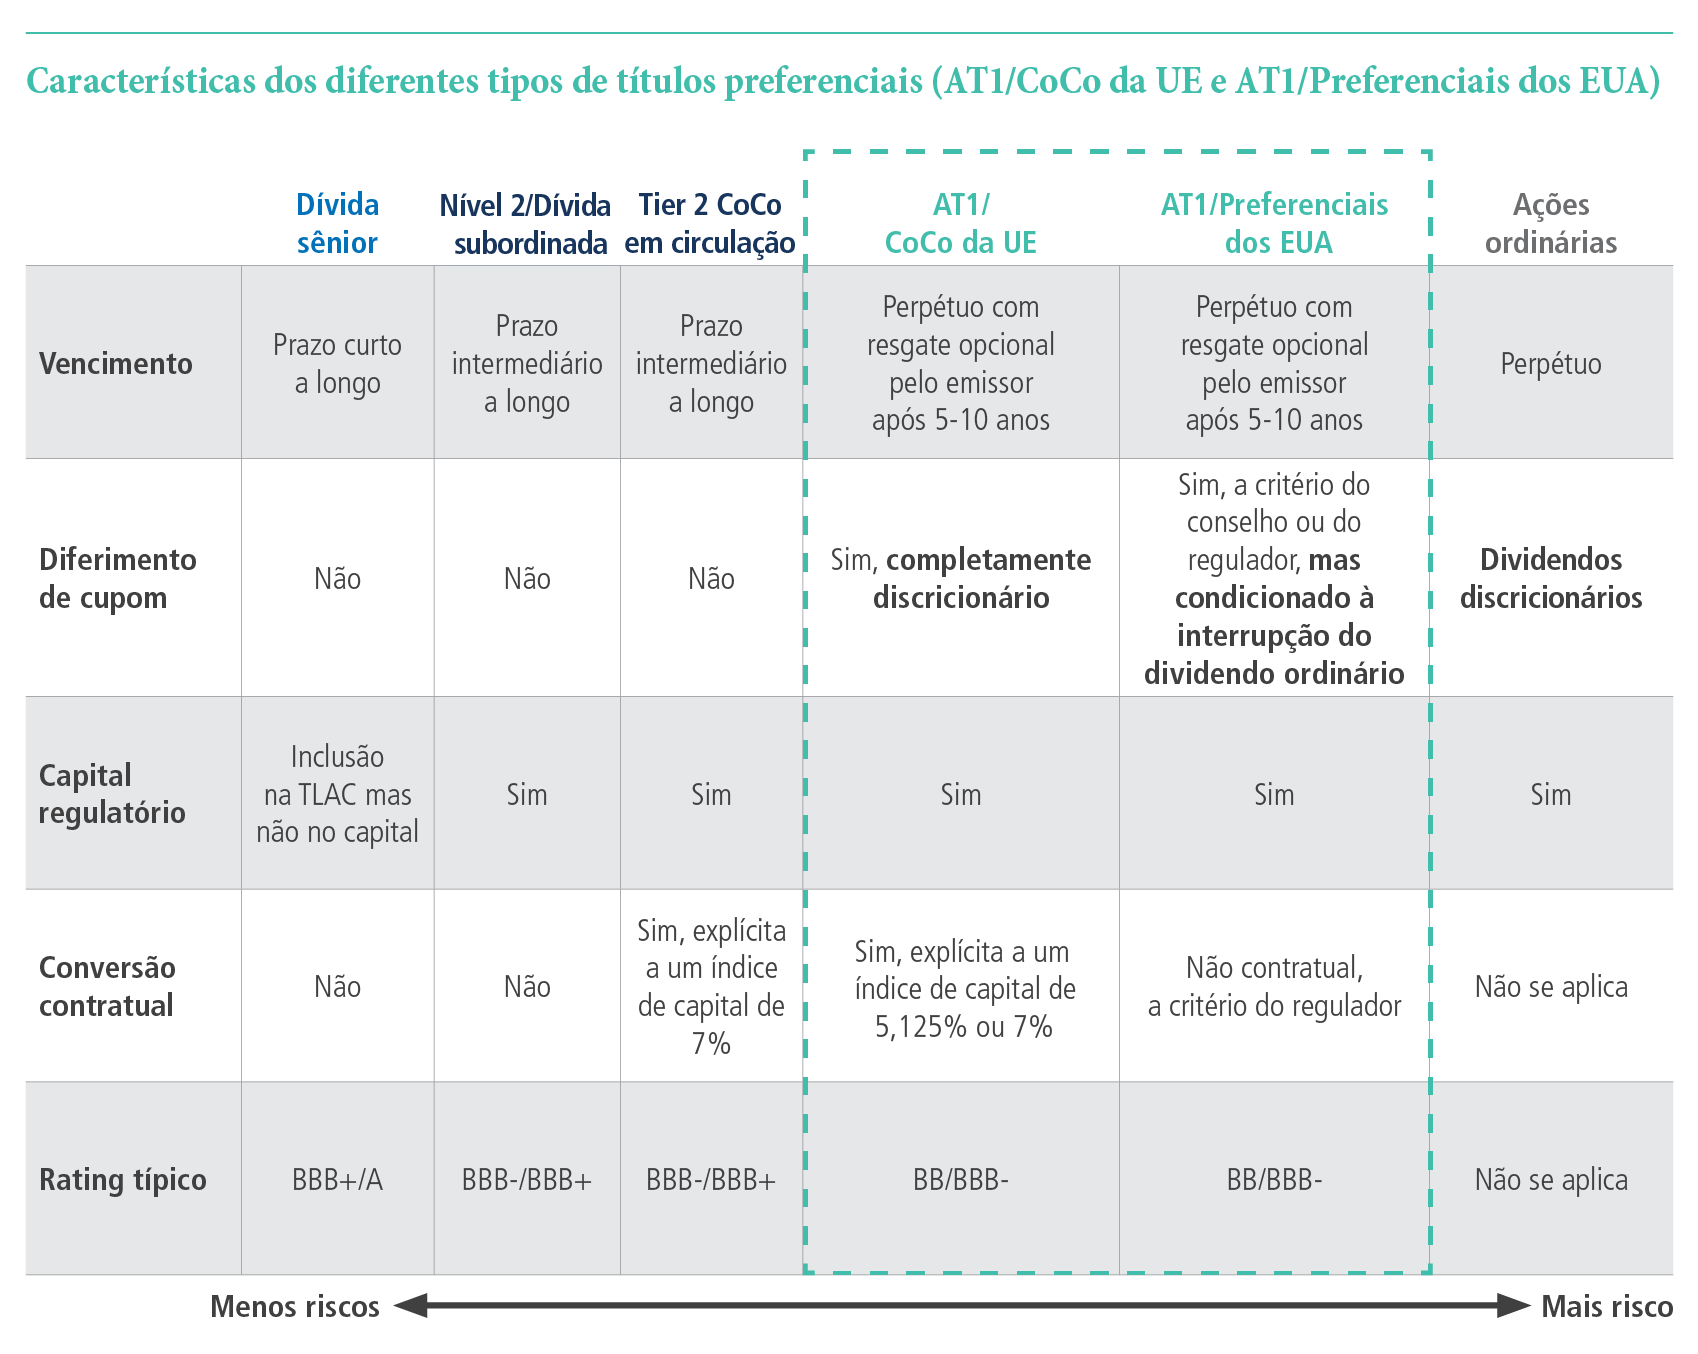 The chart compares features (maturity, coupon deferral, regulatory capital, contractual conversion, typical rating) of different types of preferred securities from lower risk to higher risk.